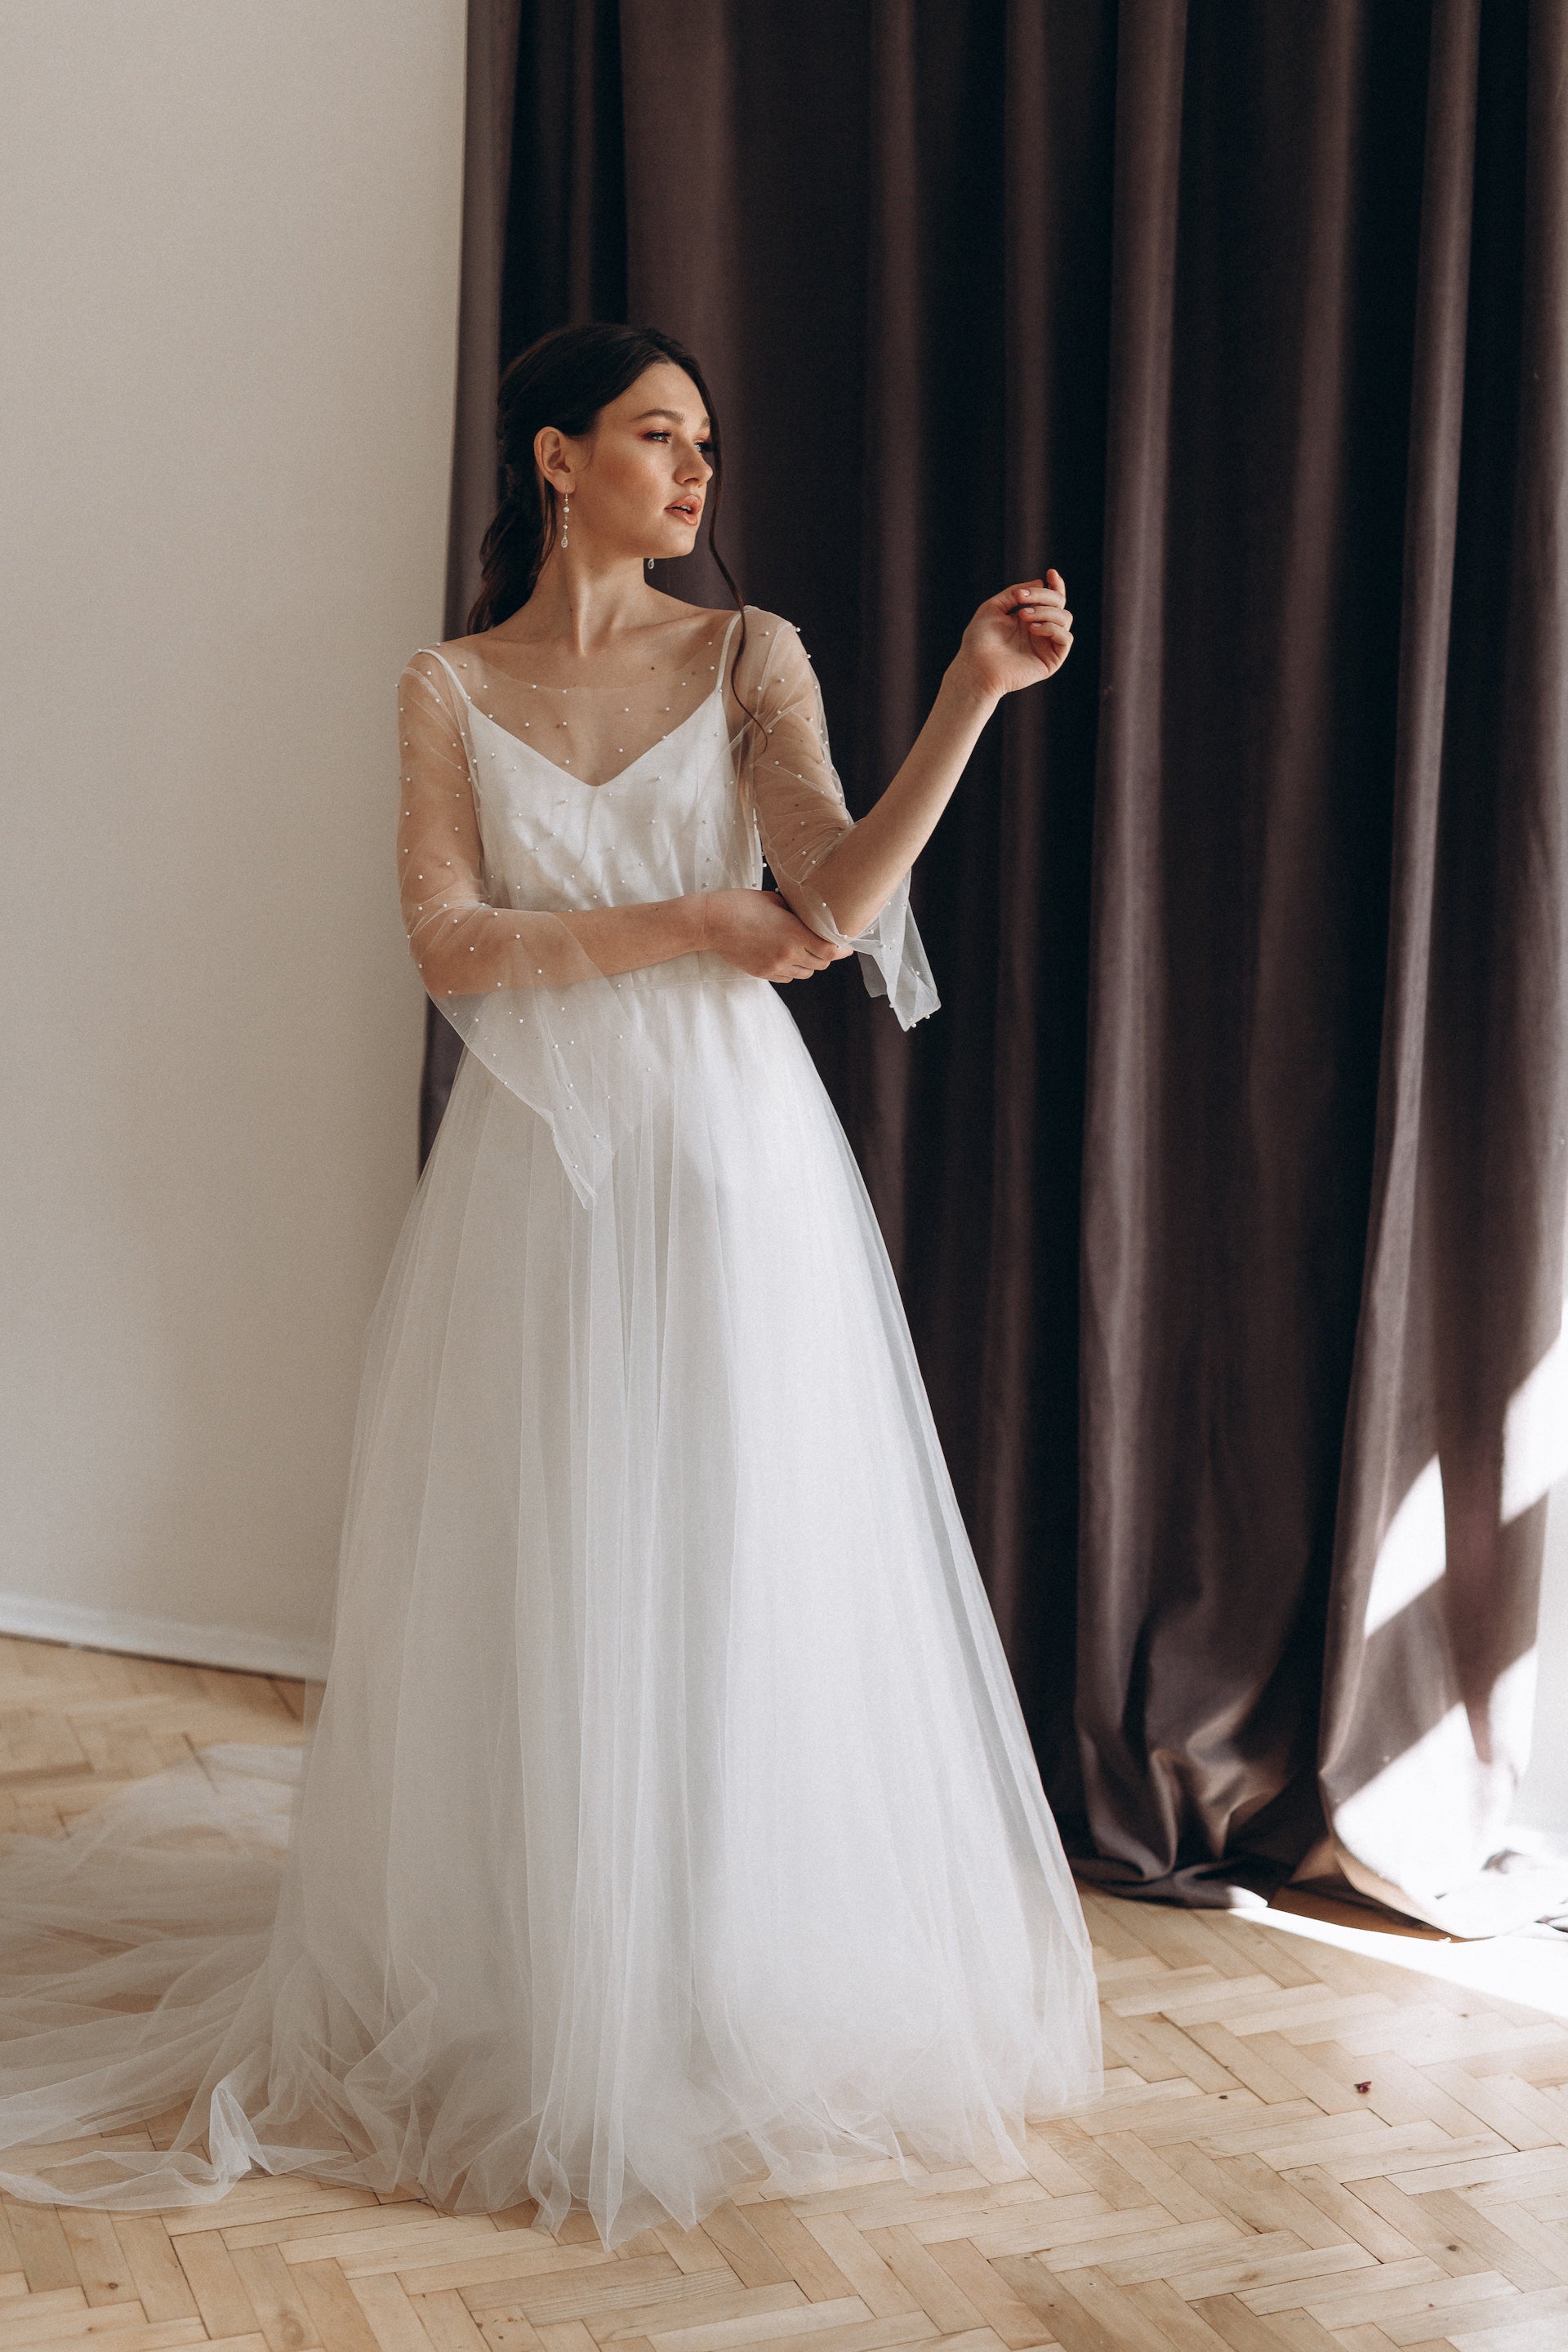 "Amalia" Two-piece pearl wedding dress with long flowing sleeves